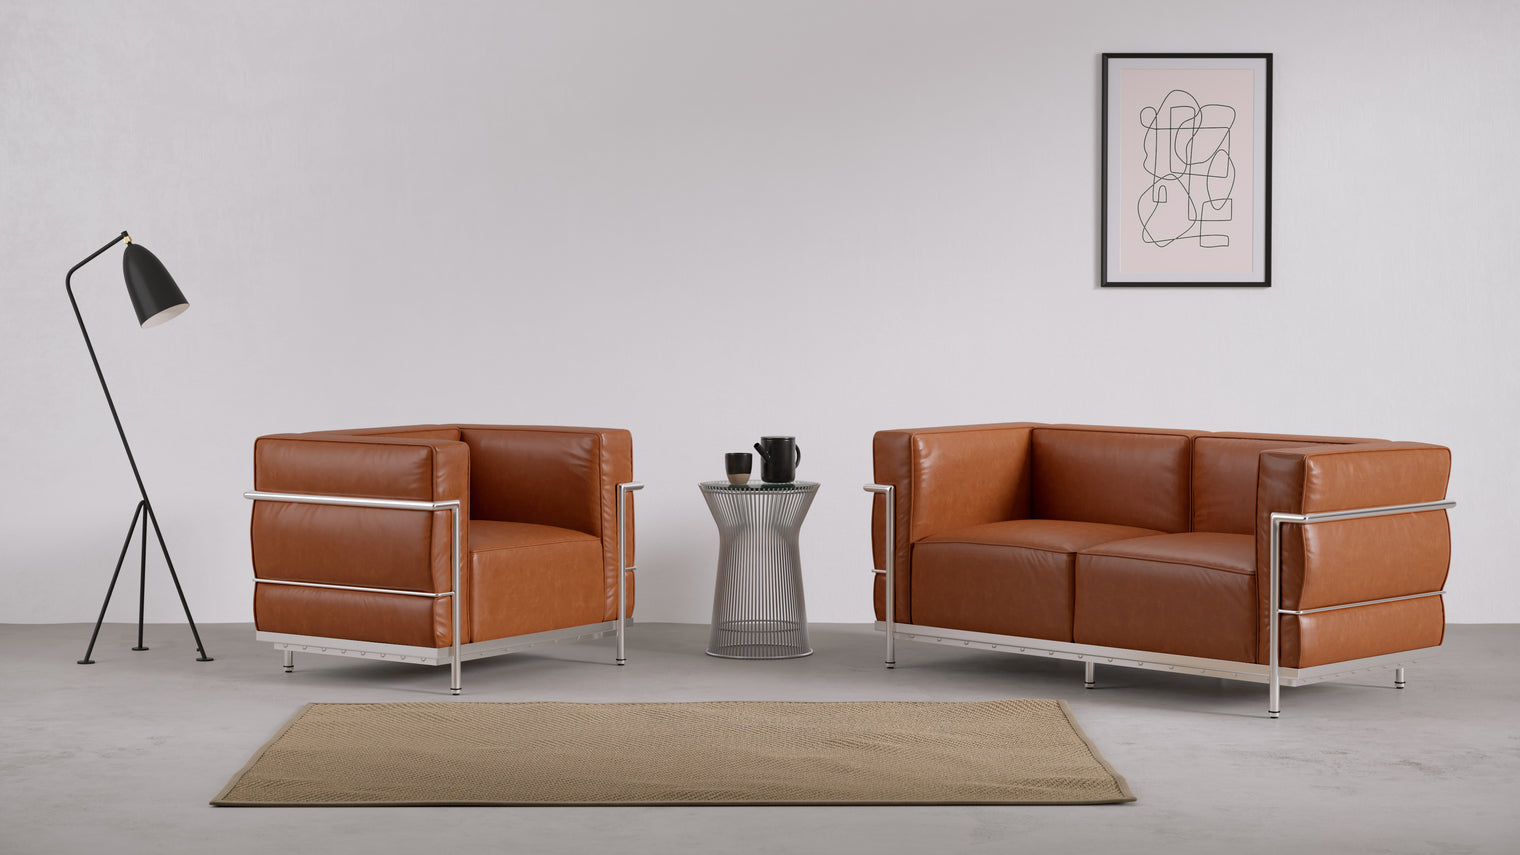 A Modern Makeover|Inspired by the classic club chair, the tempting, modern form of the Grand Modele Sofa features deep seating and a minimalist, external steel frame.
